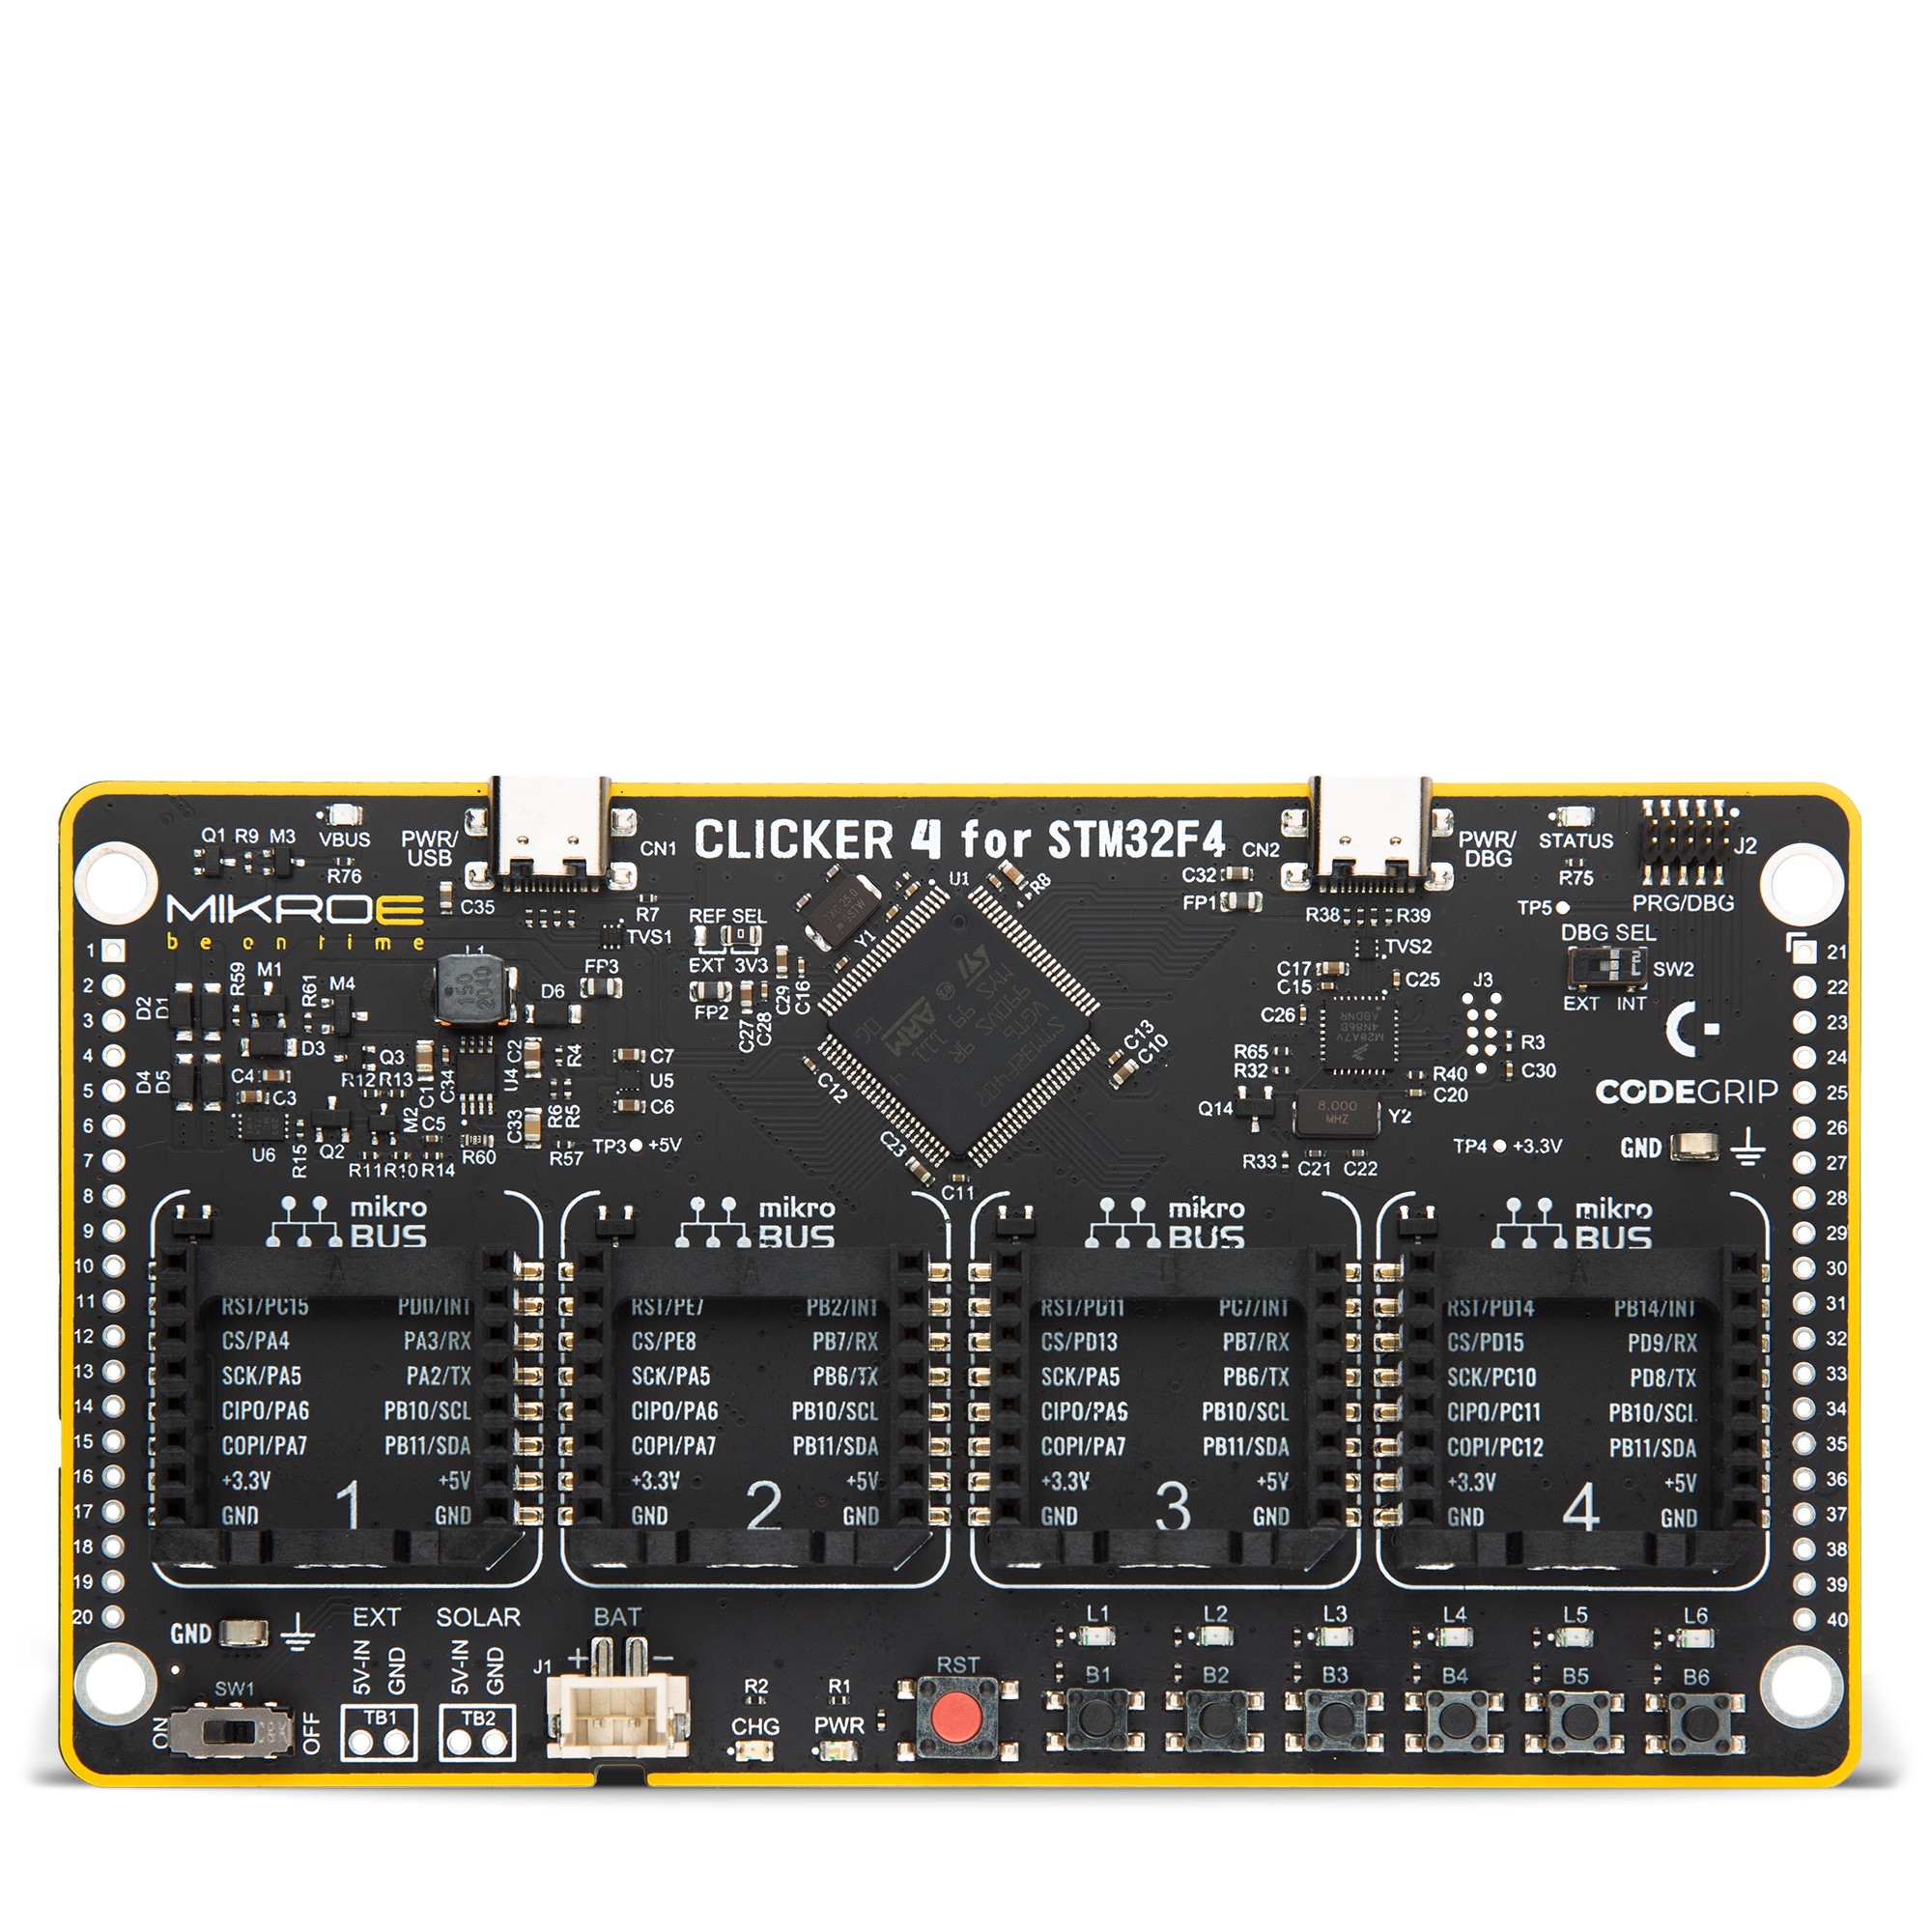 【MIKROE-5850】CLICKER 4 FOR STM32F4